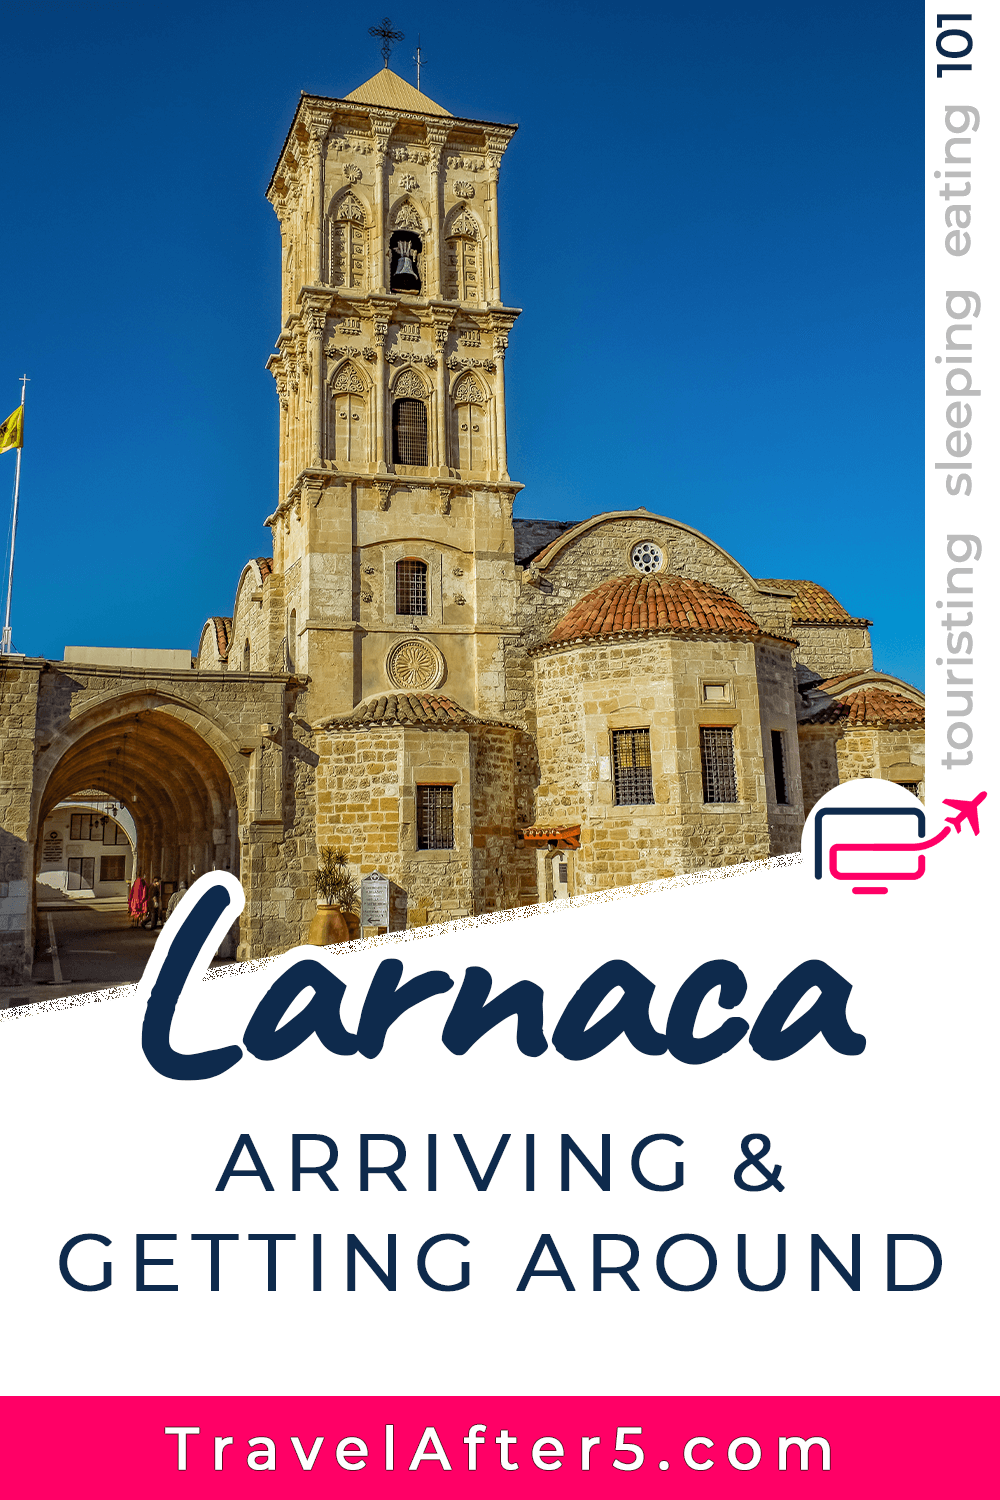 Pinterest Pin to Larnaca 101, Arriving & Getting Around, by Travel After 5